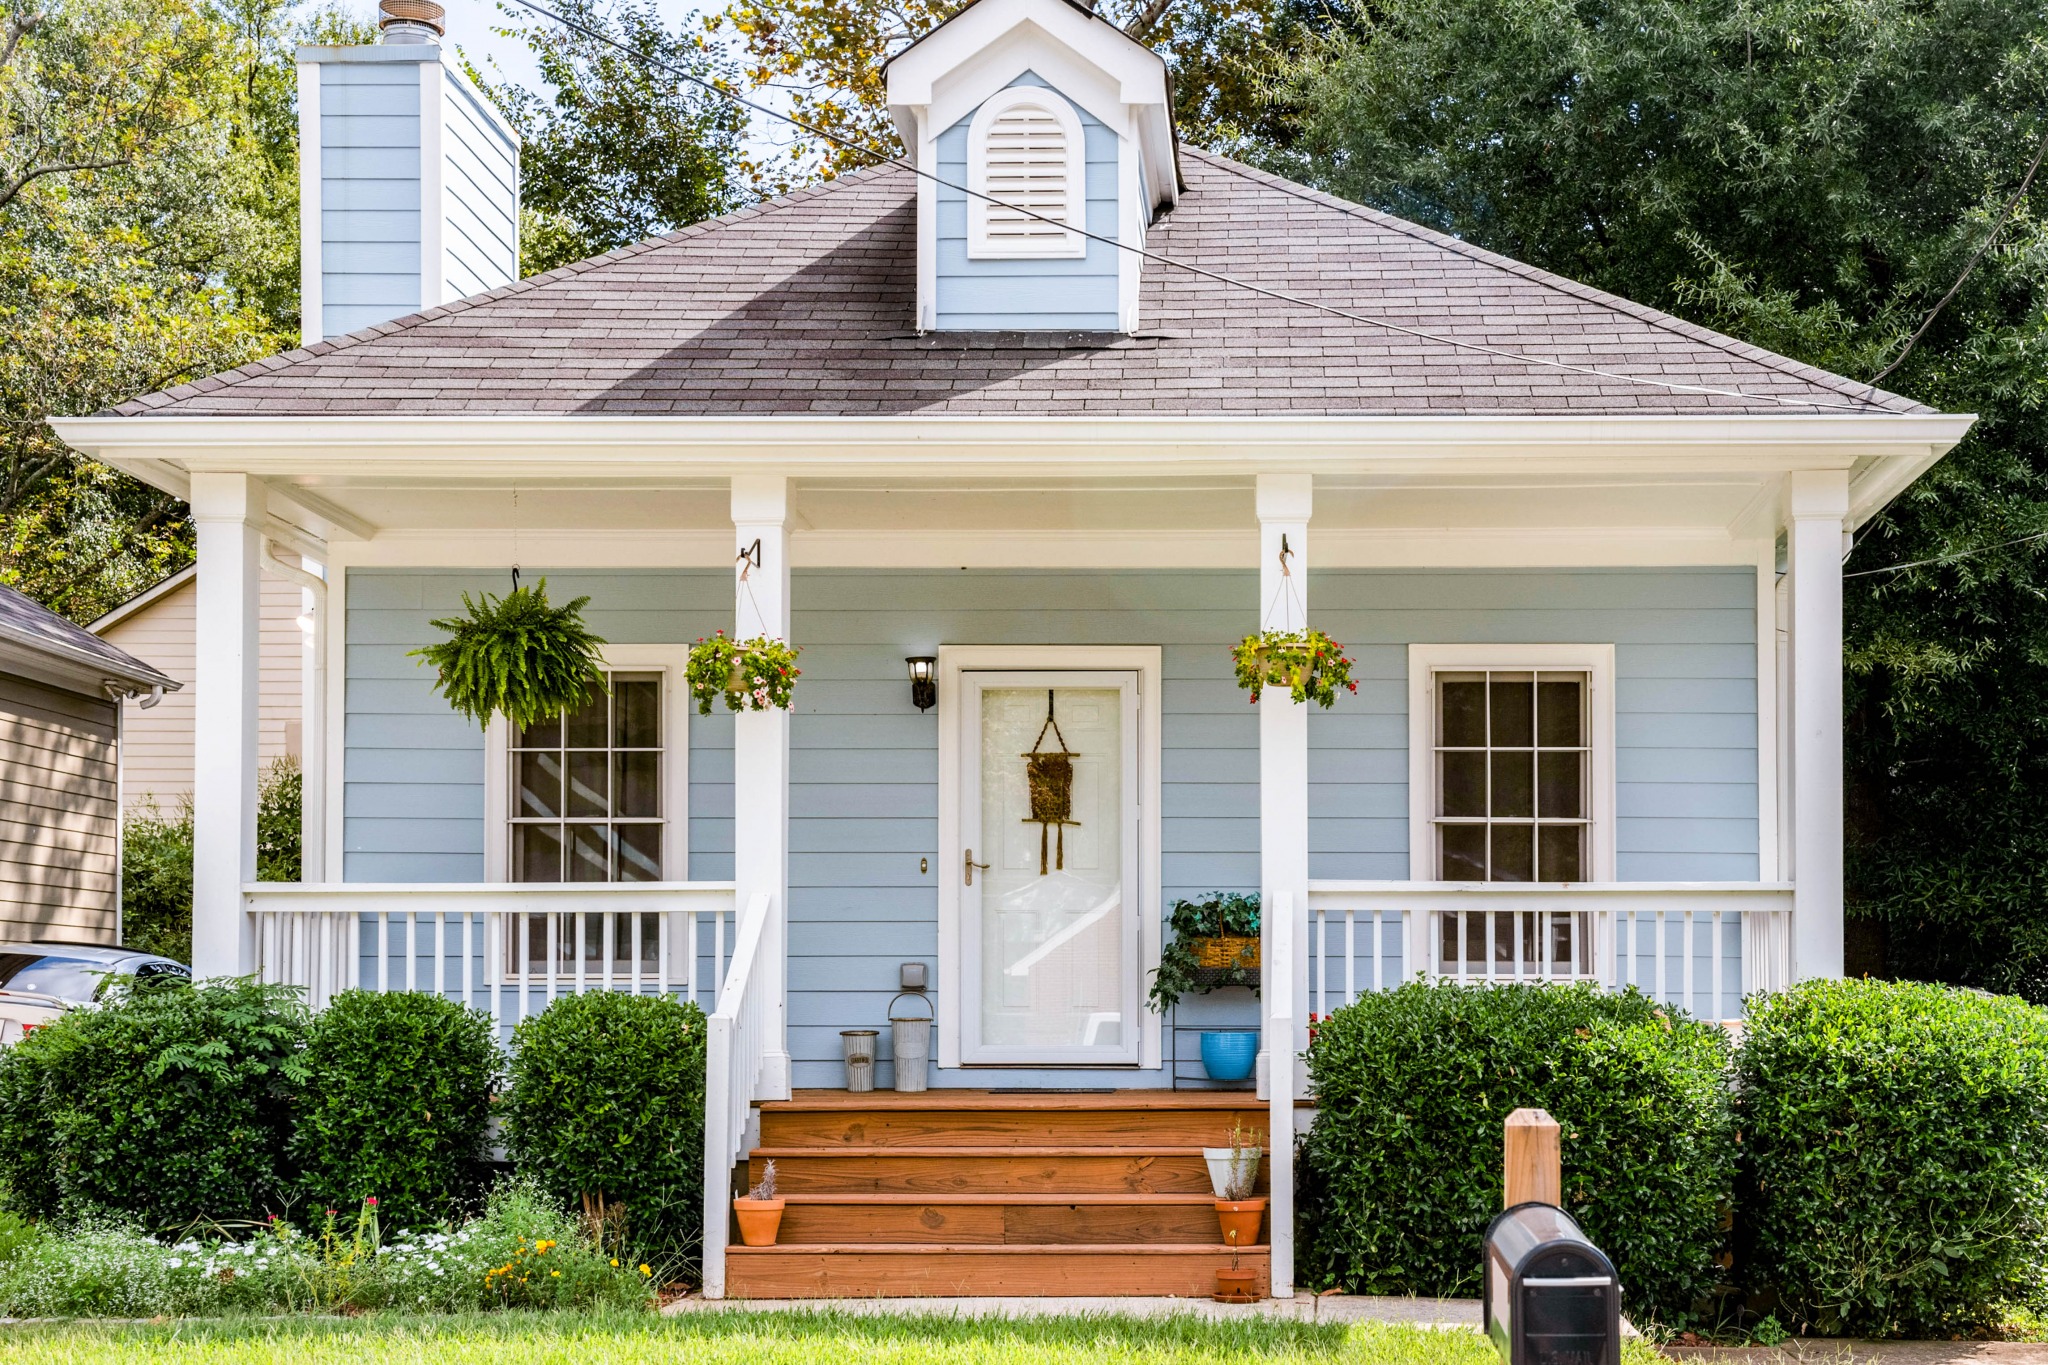 Buying a Starter Home: The Pros and Cons